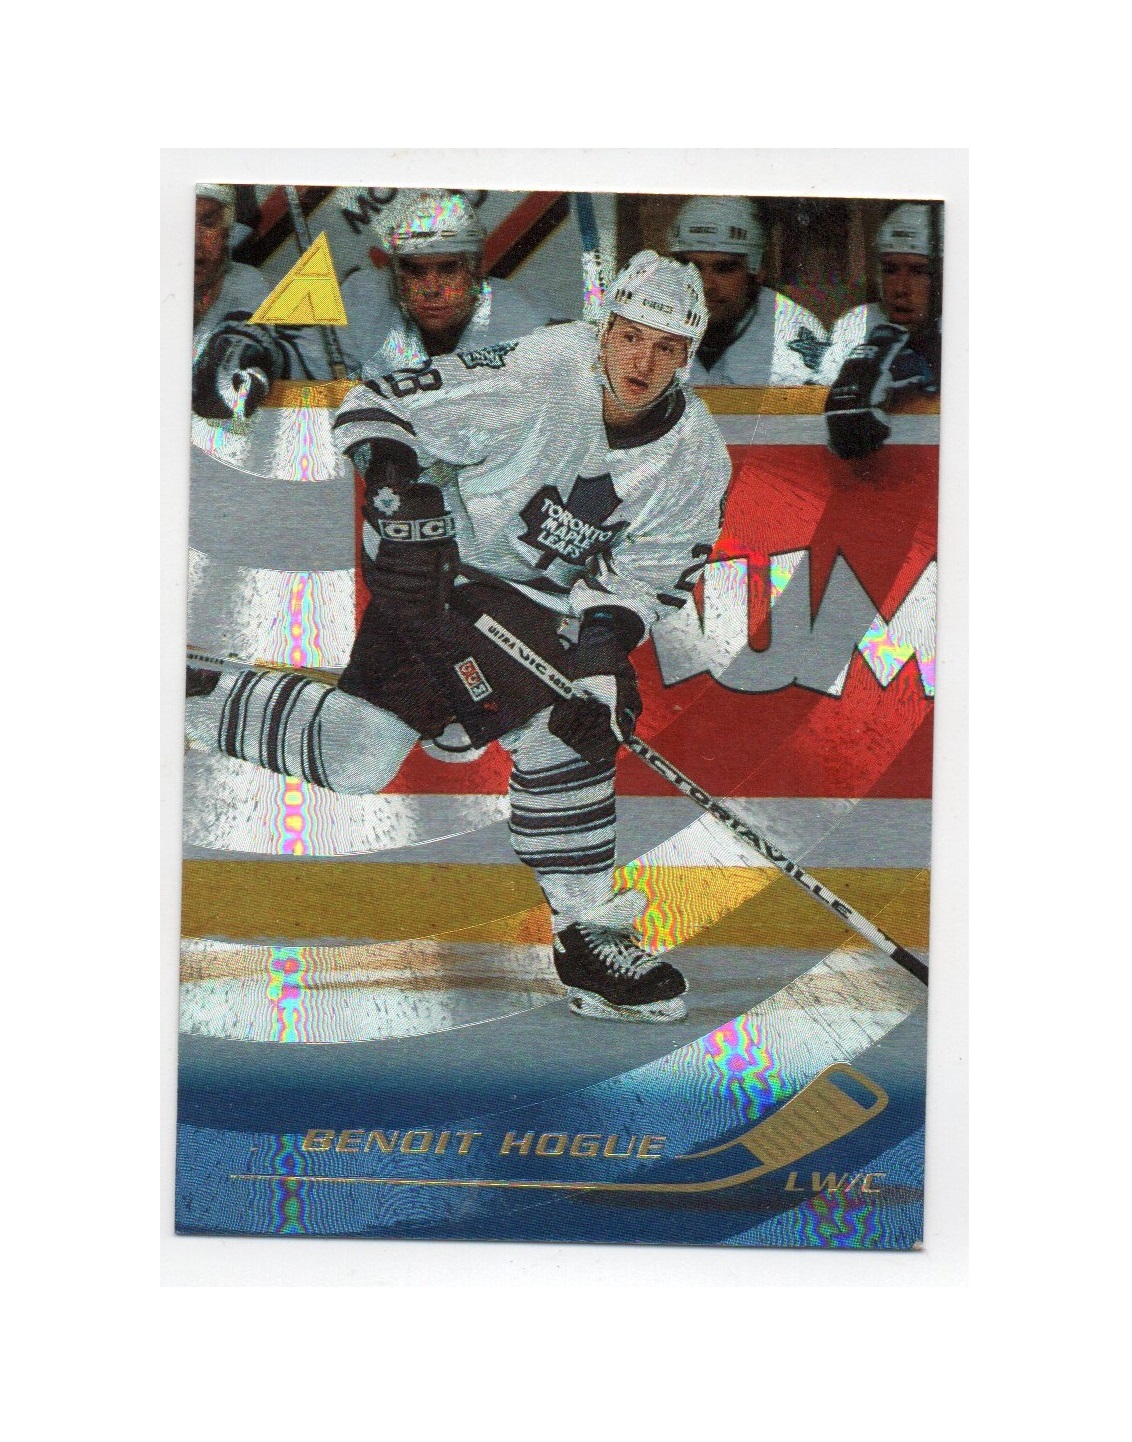 1995-96 Pinnacle Rink Collection #186 Benoit Hogue (10-X210-MAPLE LEAFS)